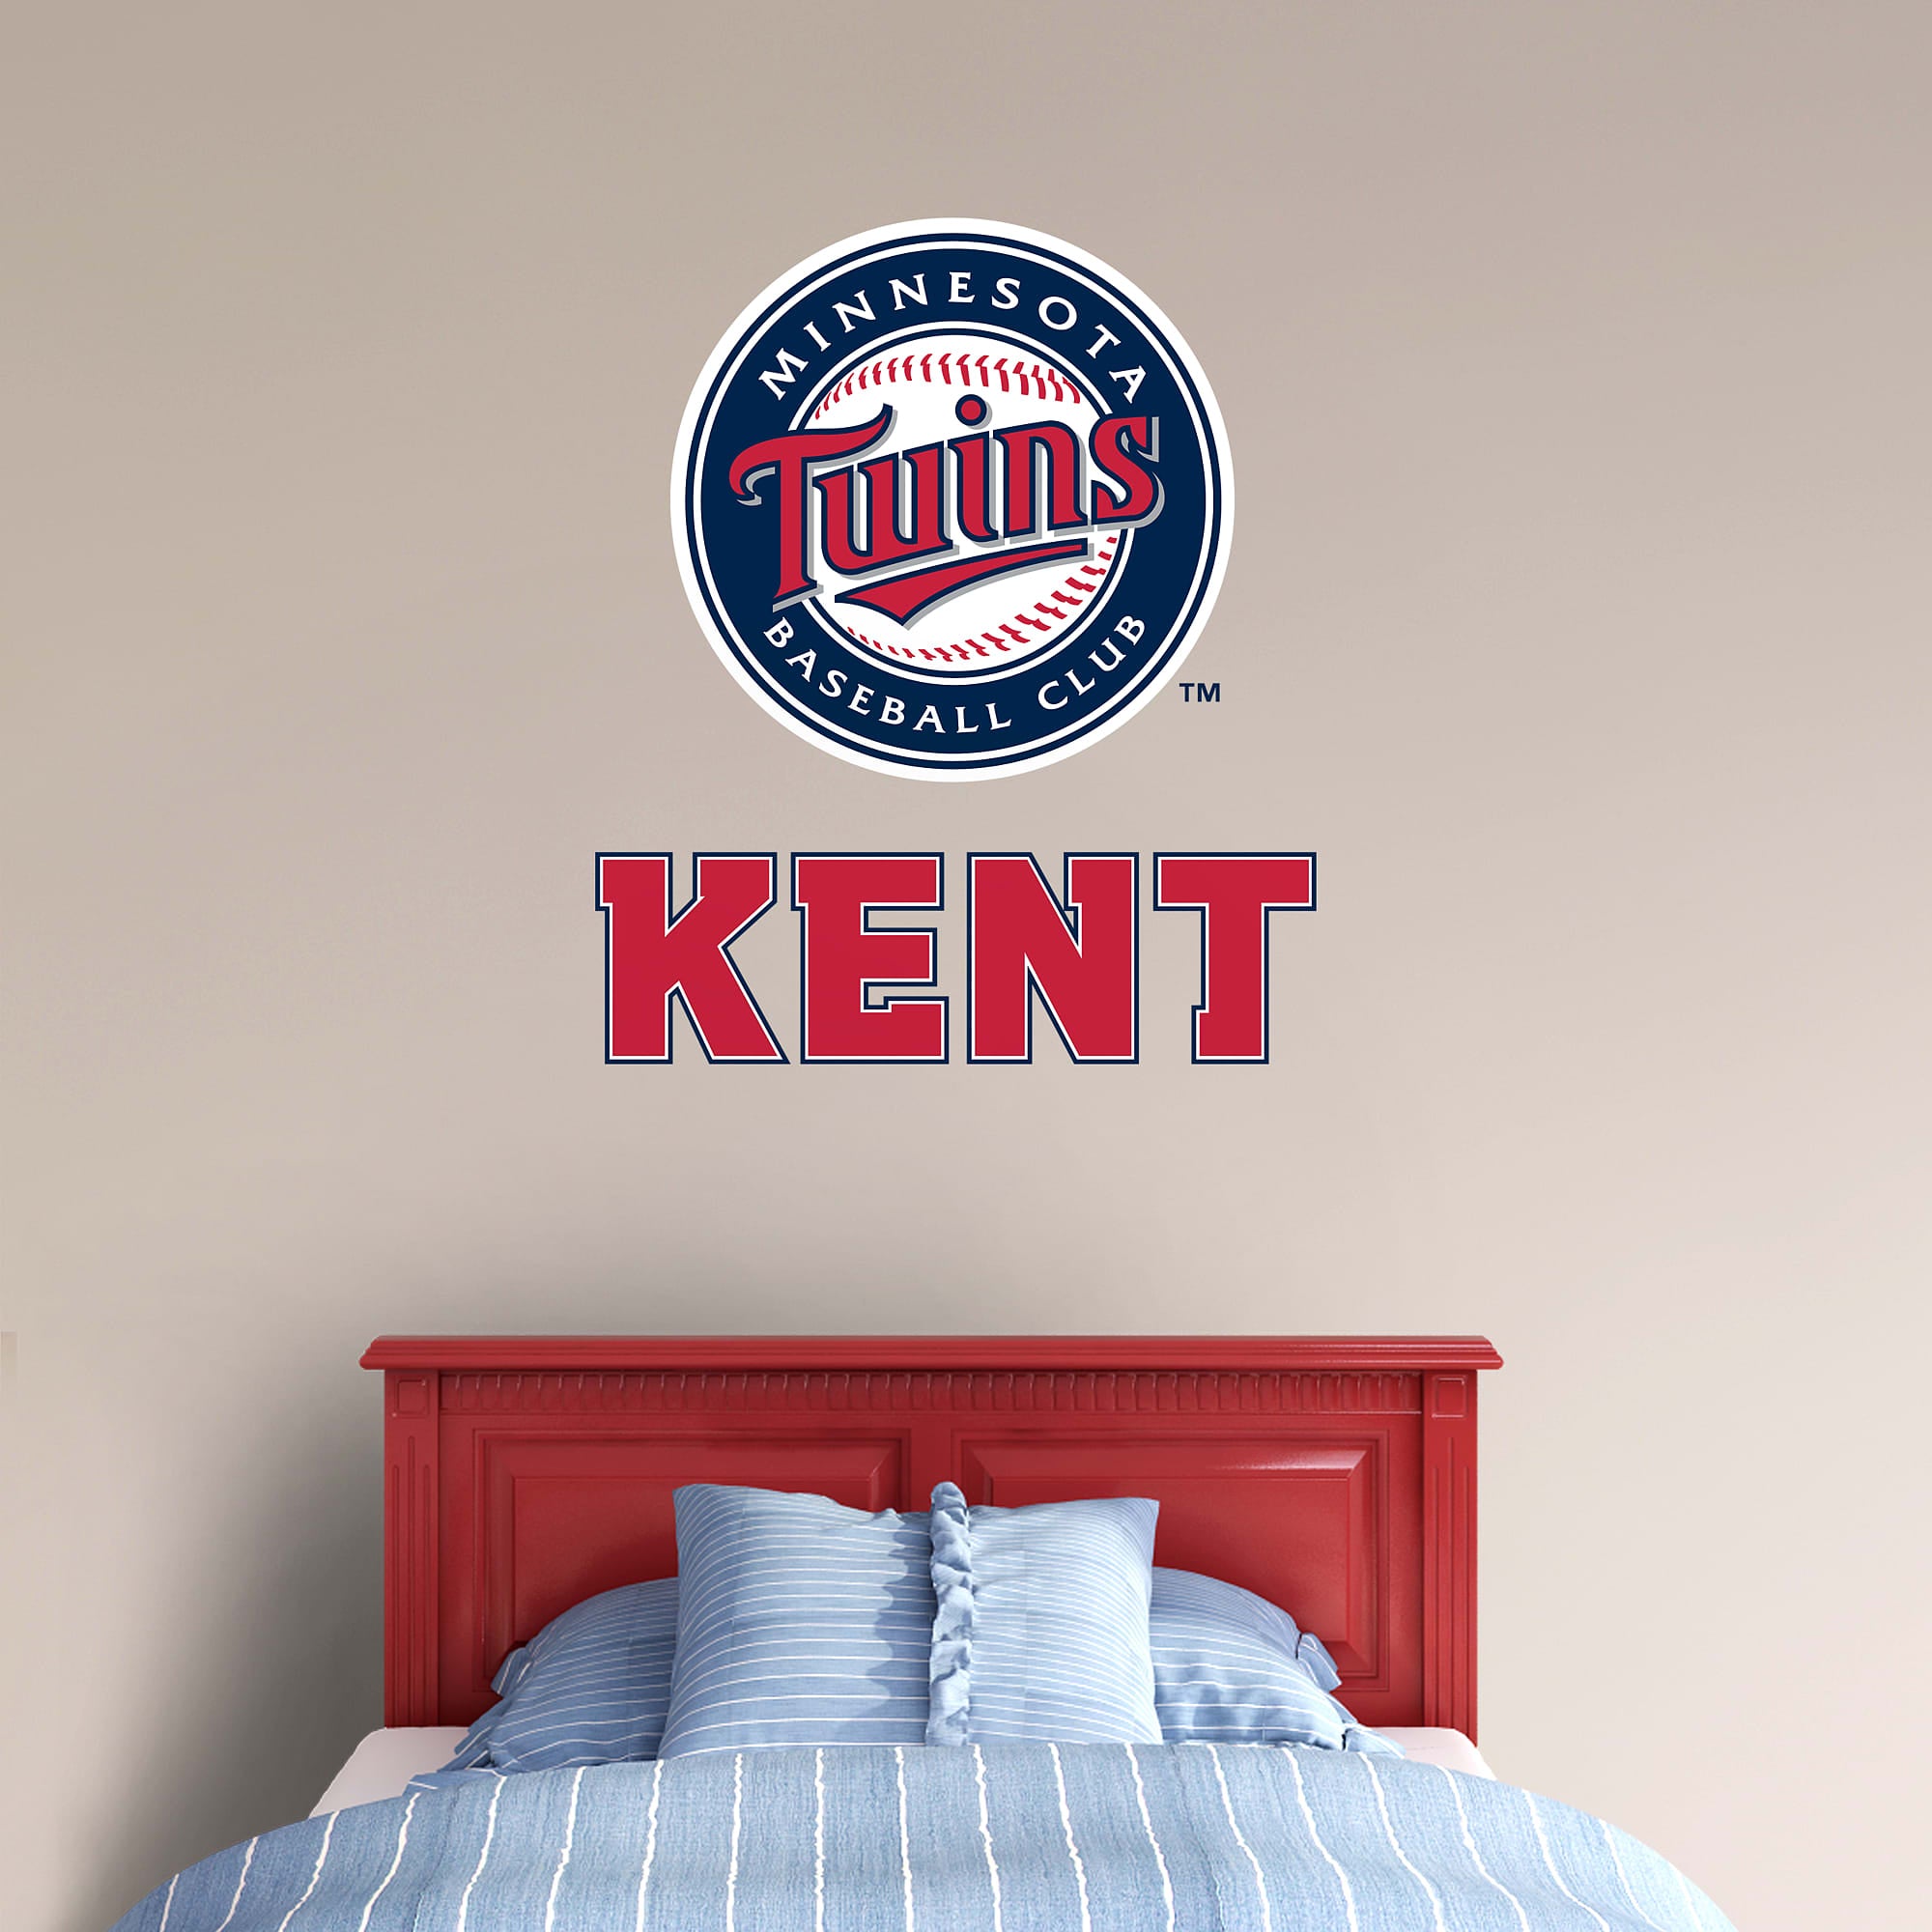 Minnesota Twins: Stacked Personalized Name - Officially Licensed MLB Transfer Decal in Navy (52"W x 39.5"H) by Fathead | Vinyl